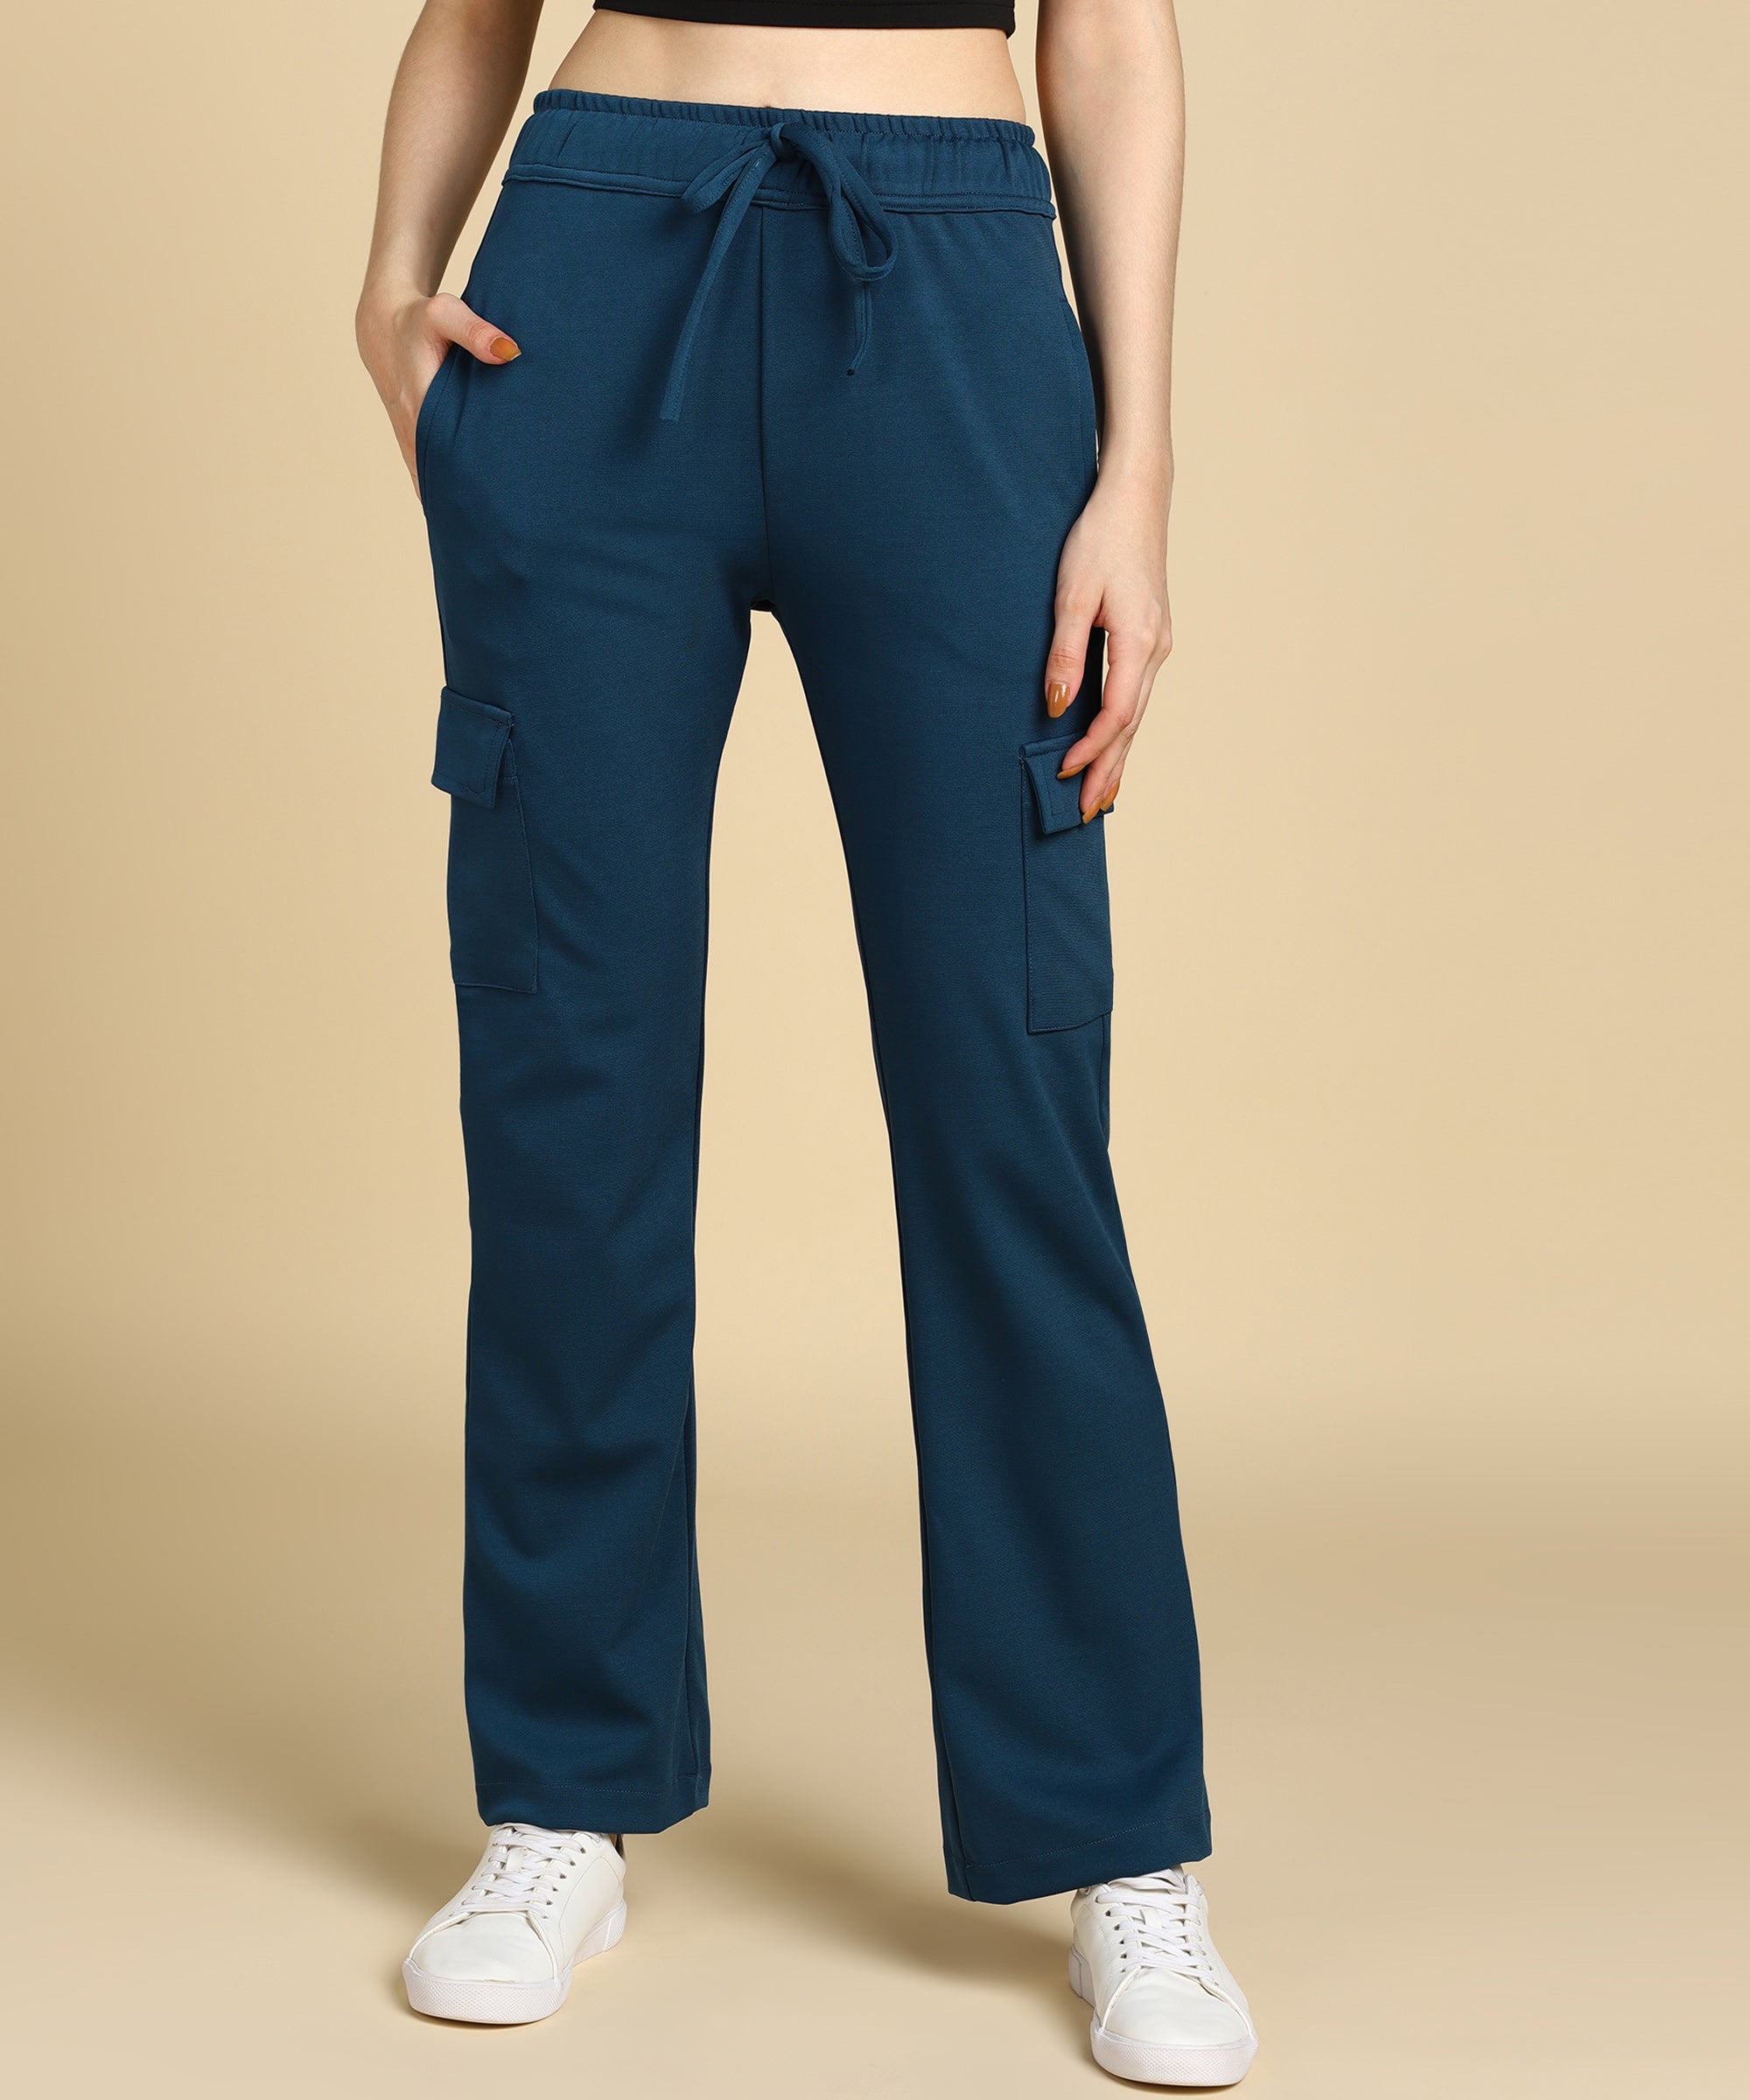 Teal Blue Casual High - Waisted Parallel Cargo Trouser Pants for